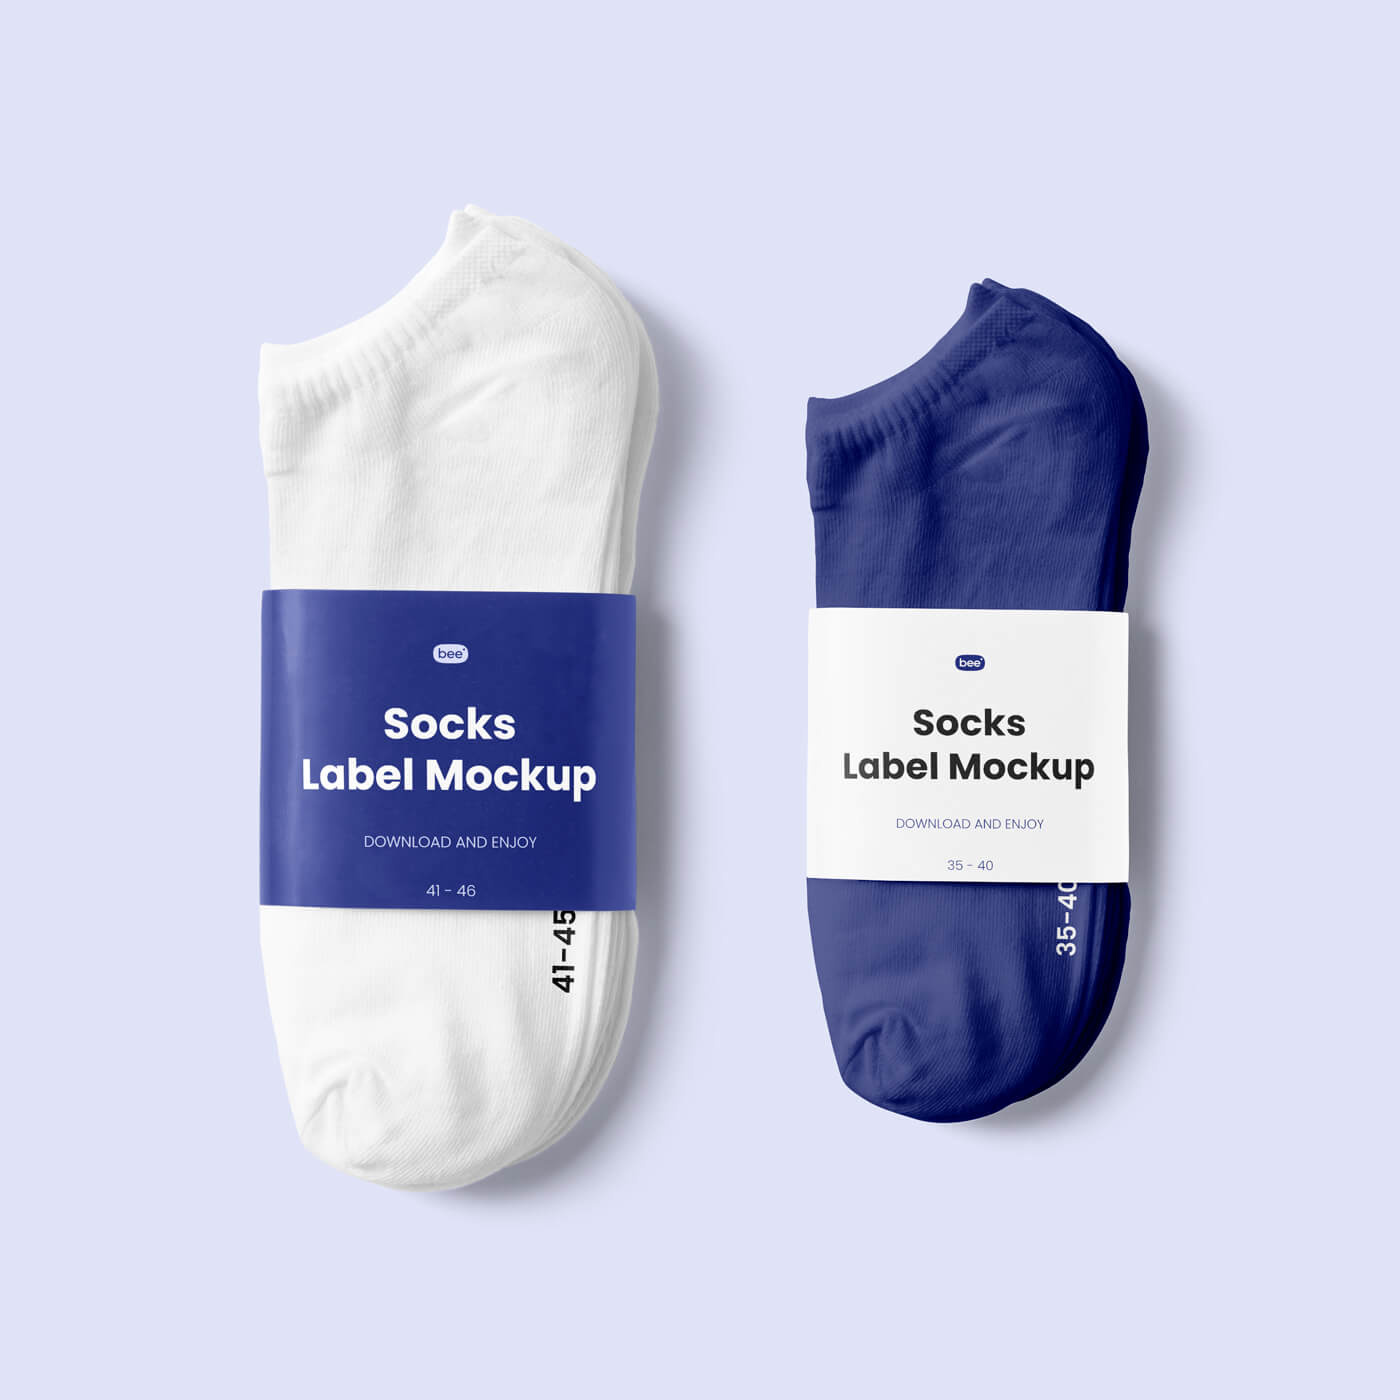 Free Tow Size Pair of Socks with Label Mockup PSD - PsFiles